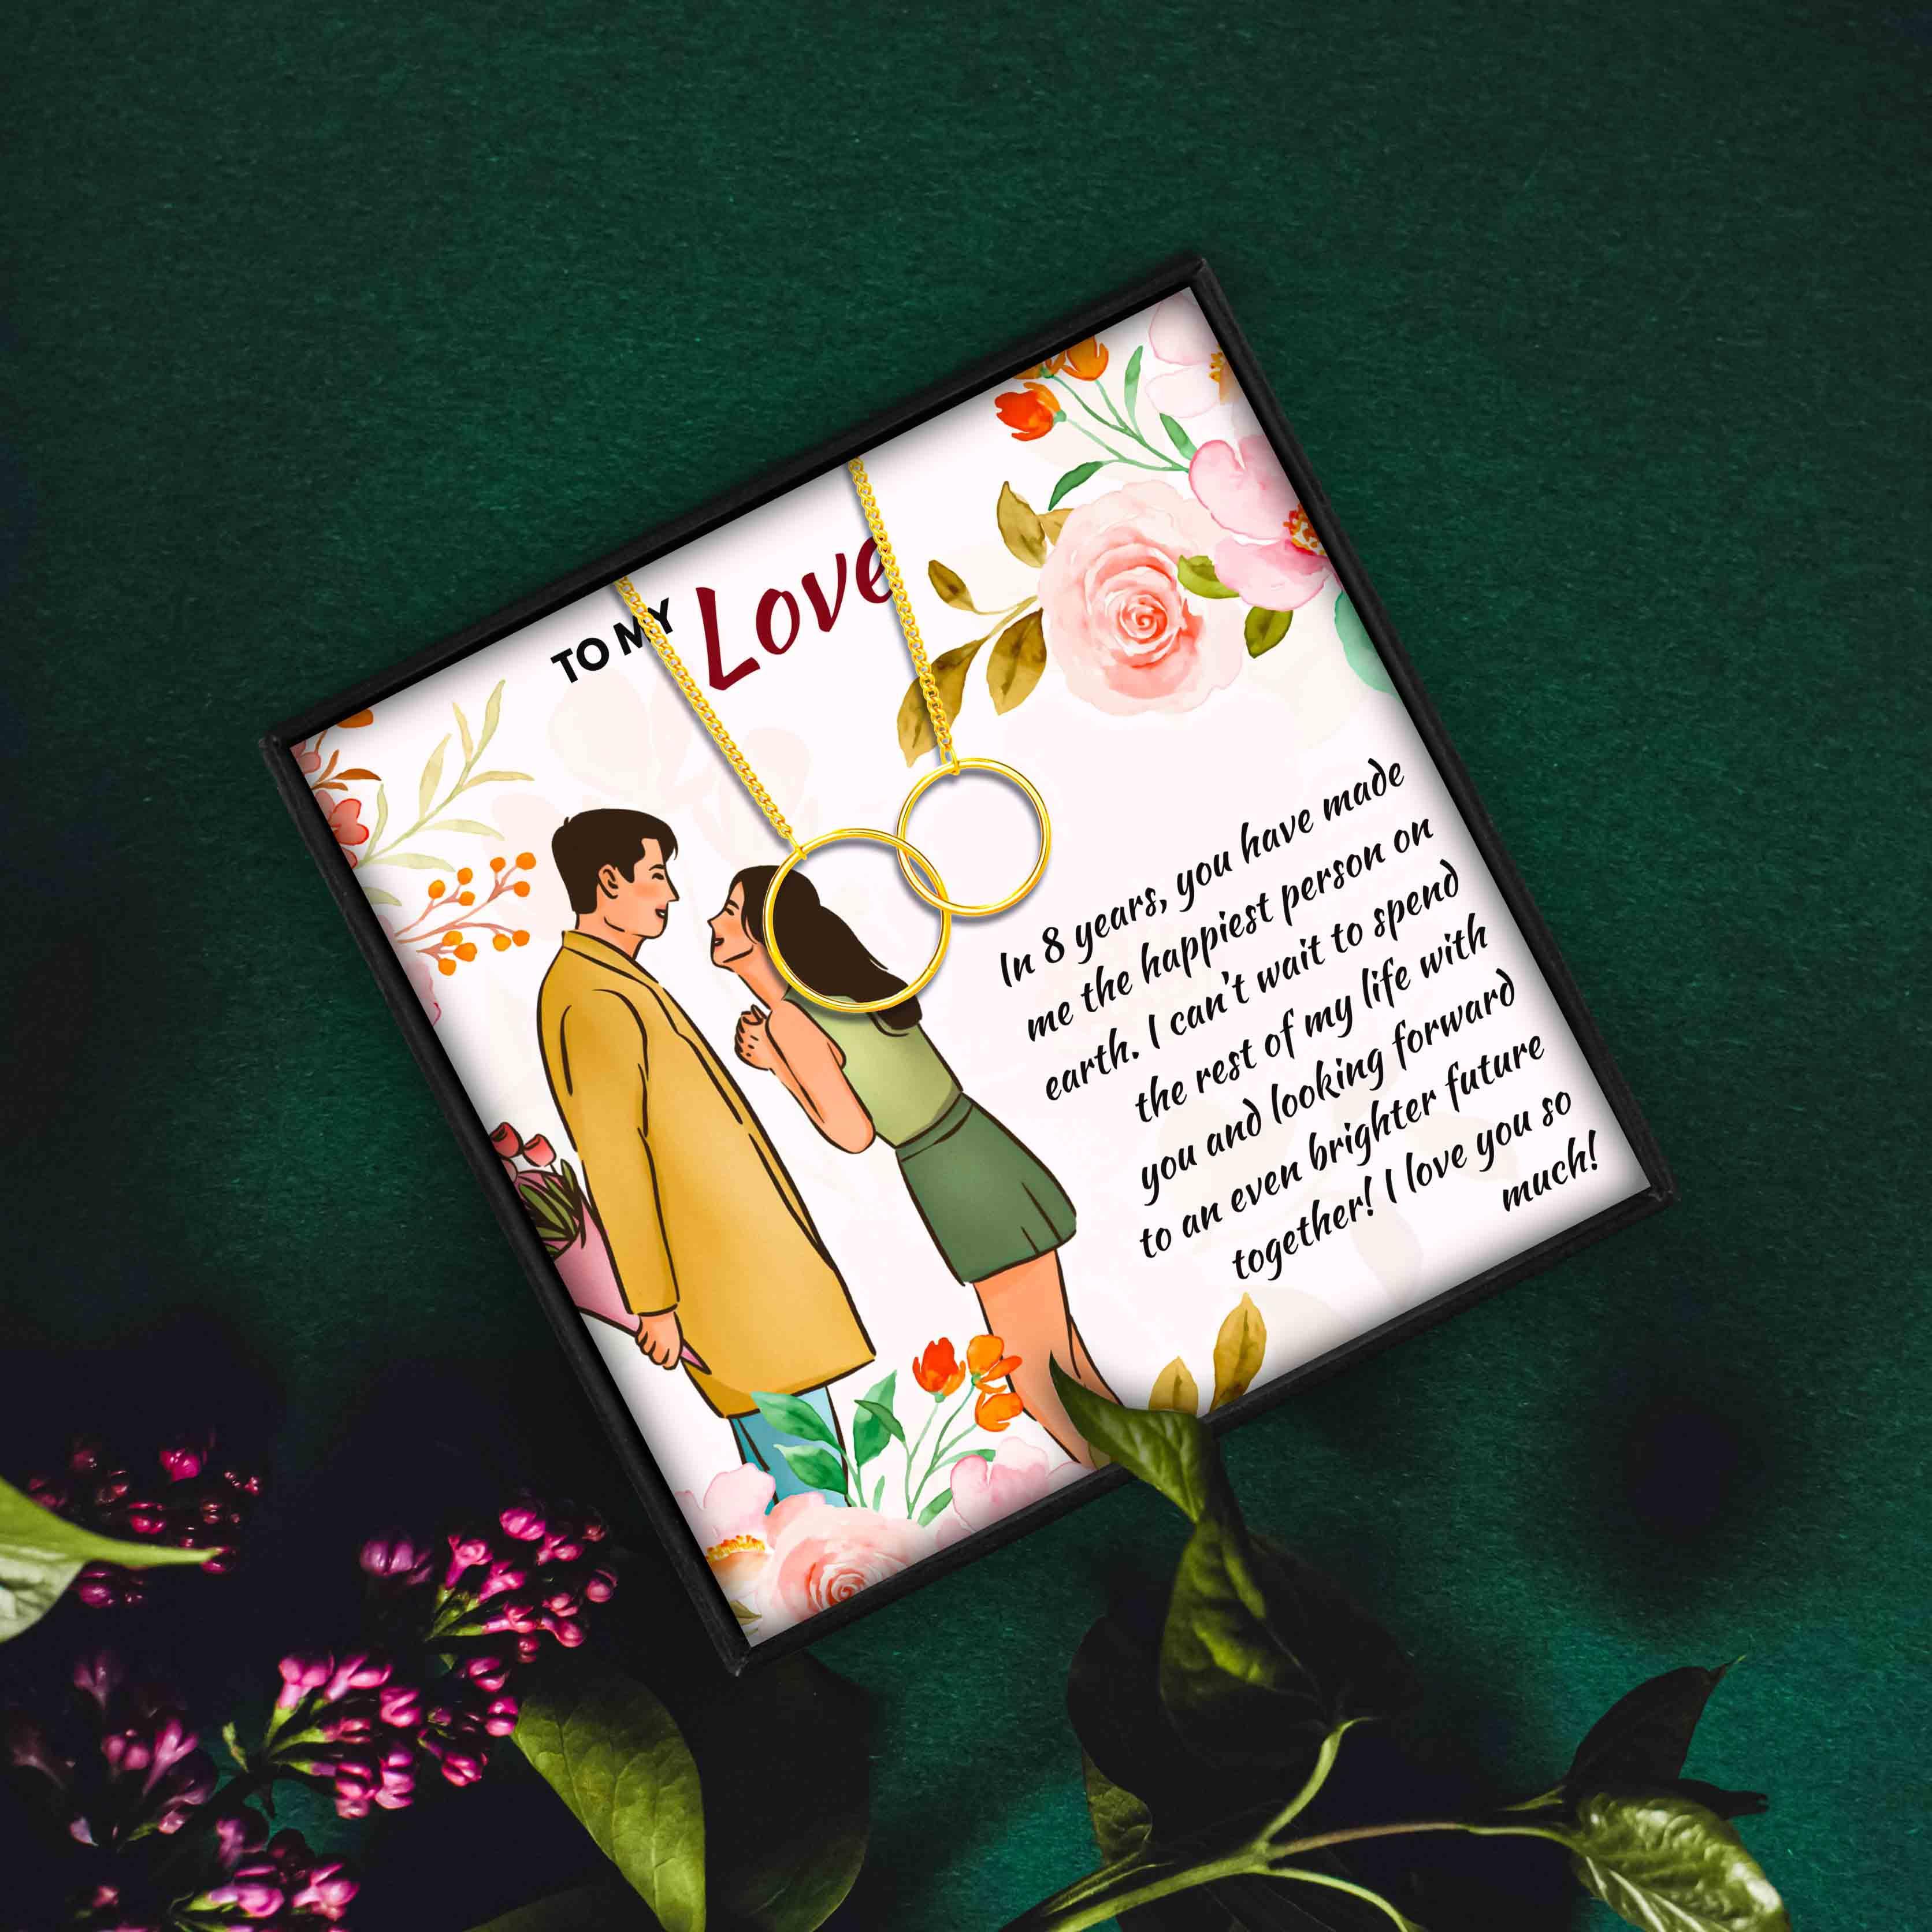 Amazon.com: 8 Year Anniversary Unique Gift for Couples - Personalized  Wooden Plaque with Engraved Puzzle Pieces – 8th Anniversary Bronze Gifts  for Him, Her, Boyfriend, Girlfriend, Husband, Wife. : Everything Else